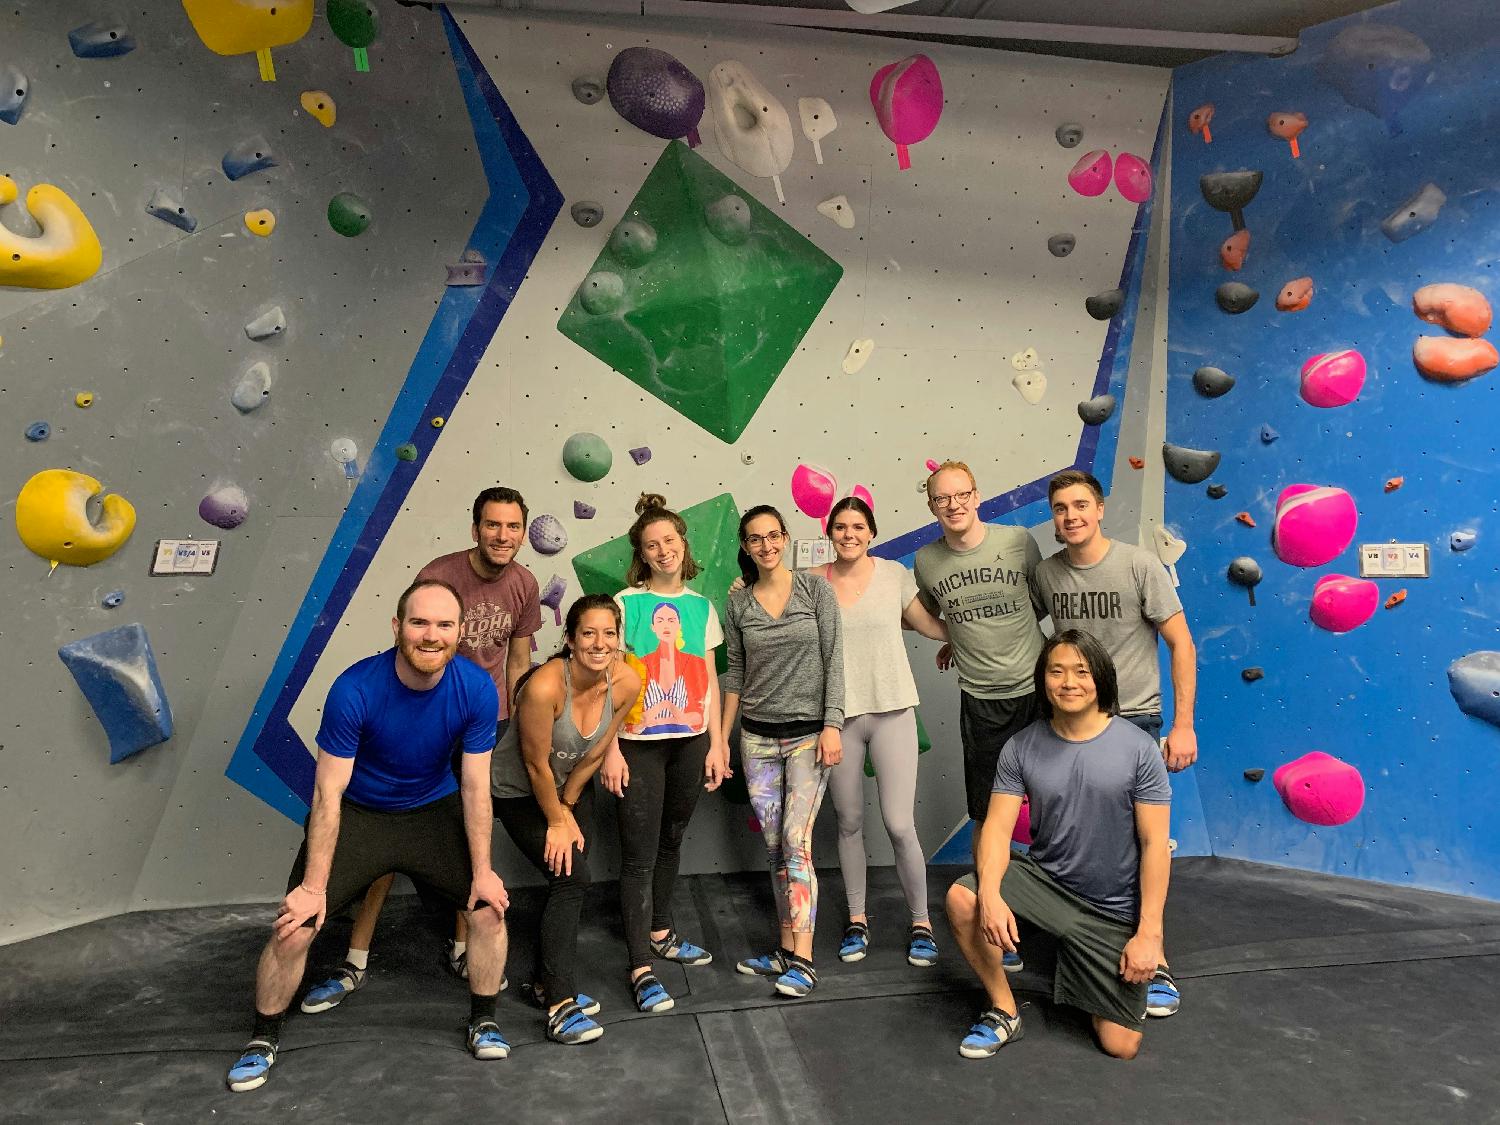 CB4 encourages team building by sponsoring healthy activities. Here's the US team bouldering together at Central Rock!